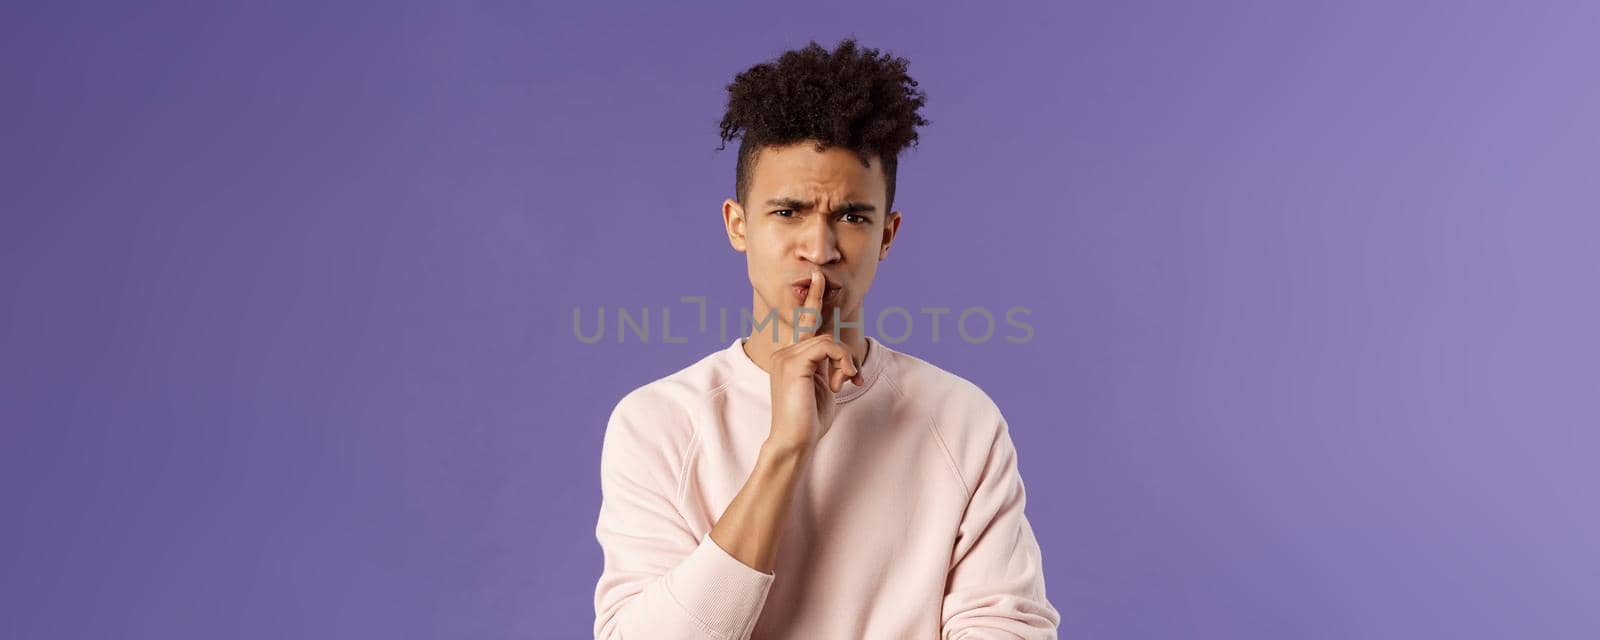 Show some respect. Portrait of angry and annoyed, displeased young hispanic man telling to keep quiet, shushing at someone being too loud, hold index finger over mouth frowning, scolding person.